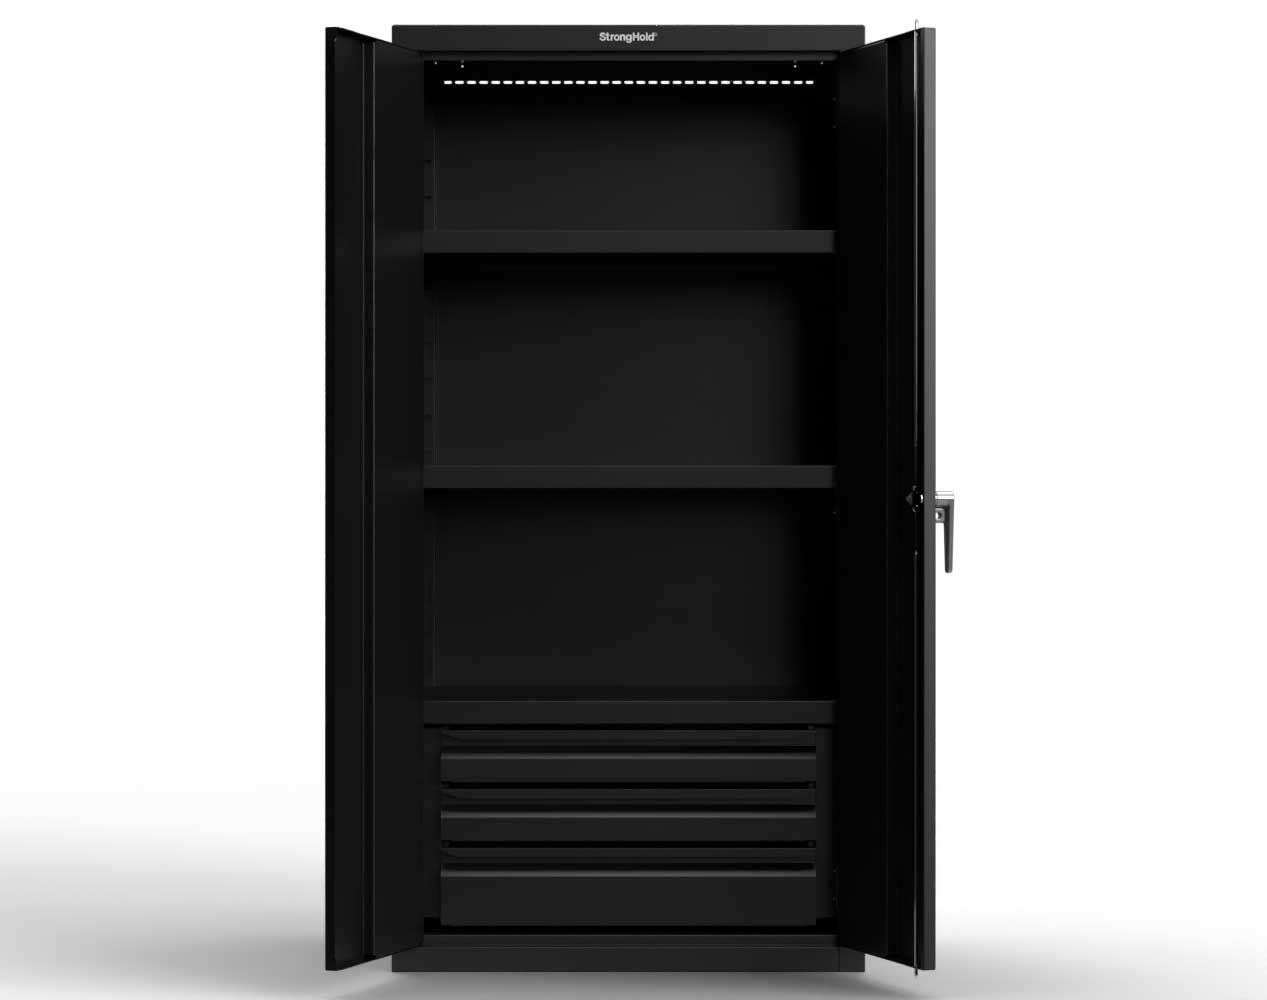 Heavy Duty 18 GA Cabinet with 3 Drawers and 3 Shelves - 36 in. W x 24 in. D x 72 in. H